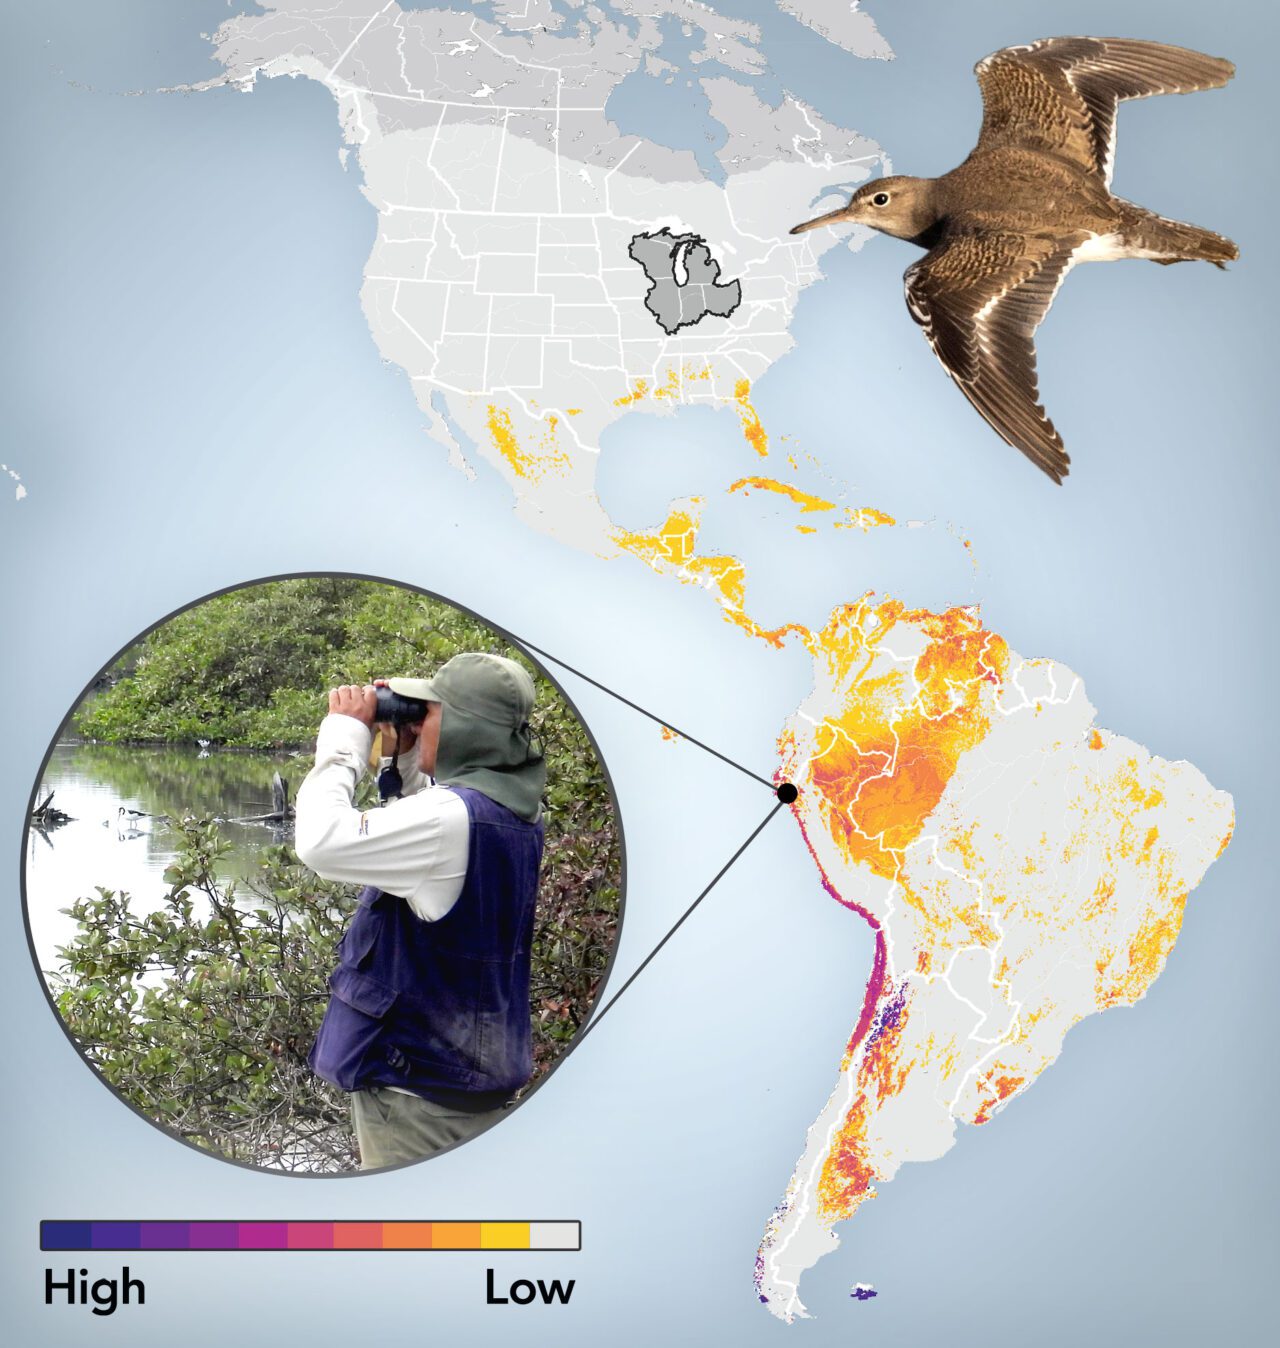 Map graphic of the Americas with colors marking out bird populations, and a photo of a woman with binoculars and a brown/beige bird flying.